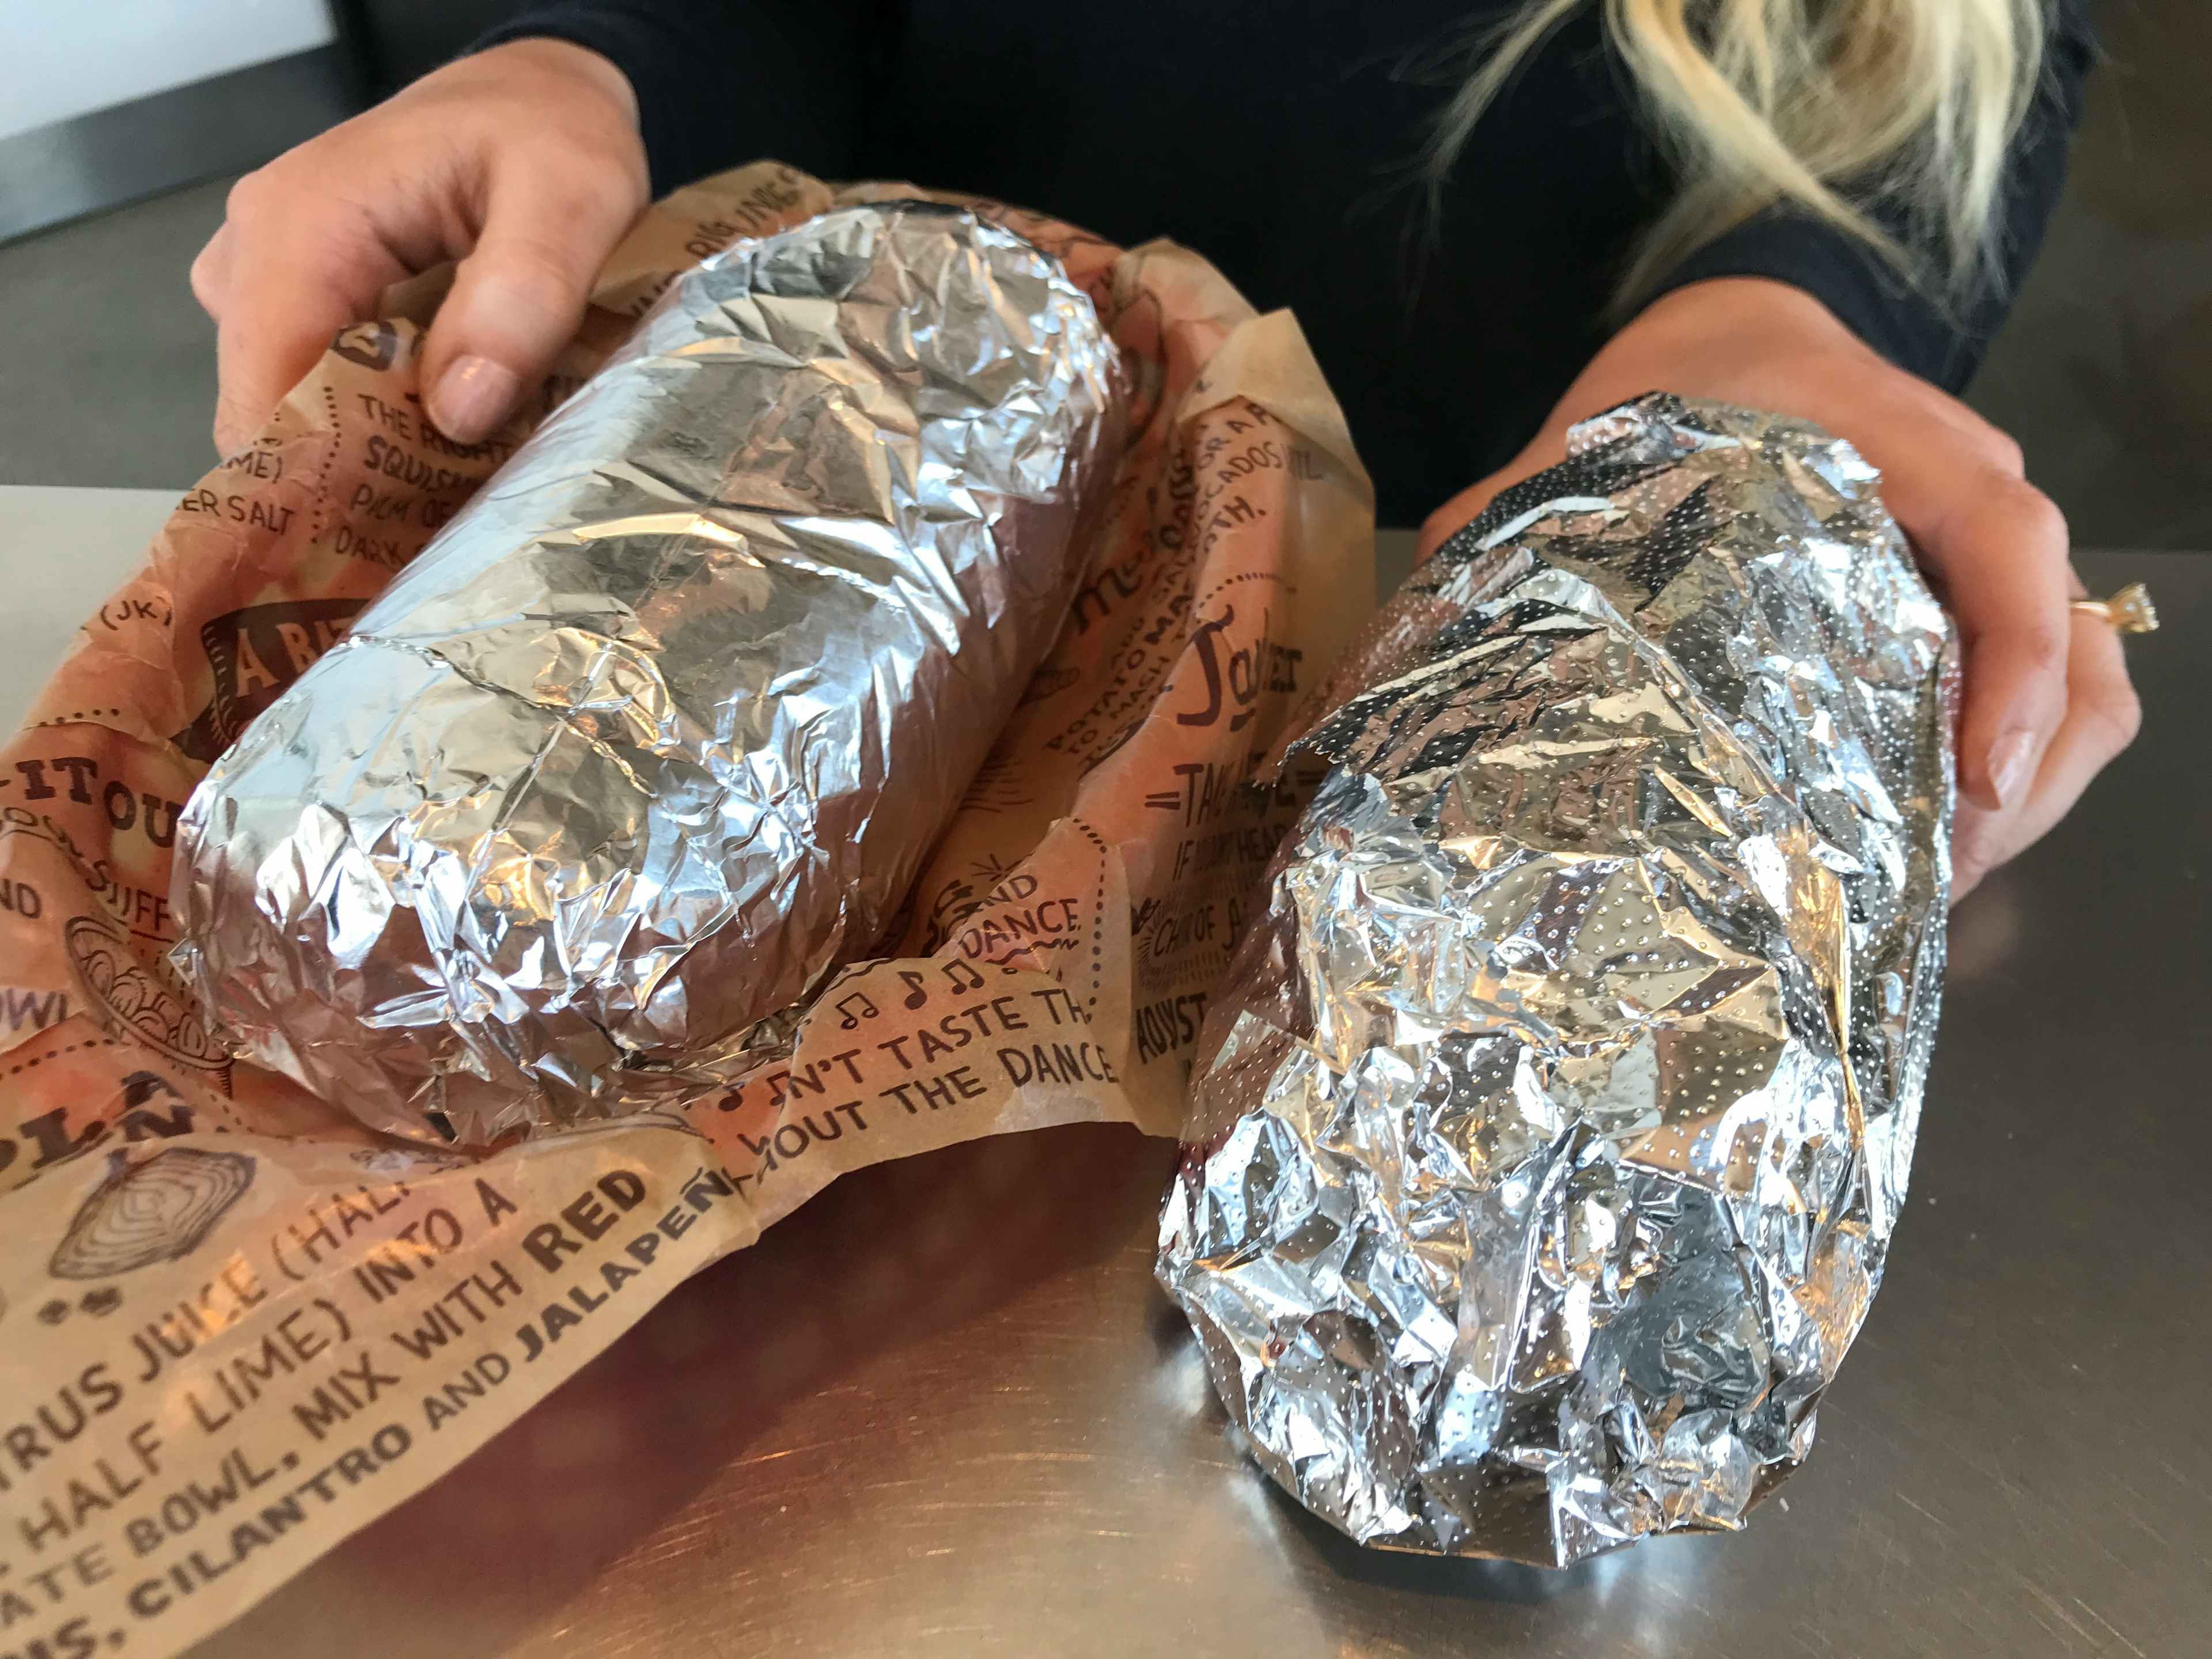 two burritos from chipotle